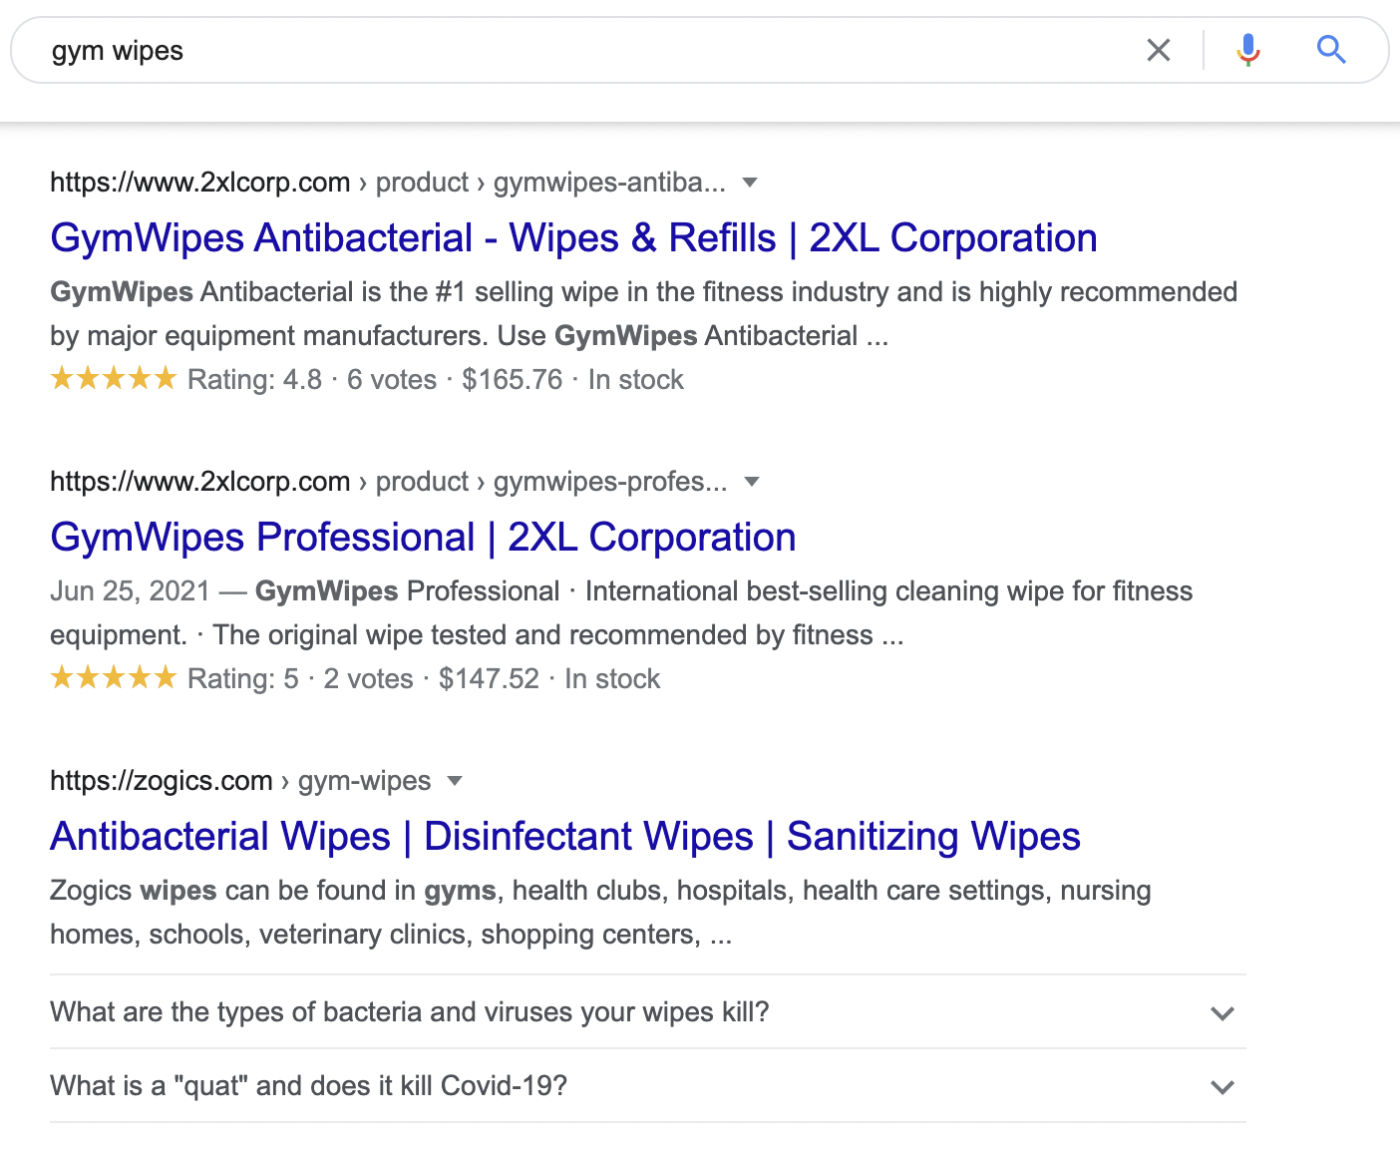 A search for "gym wipes" and the results